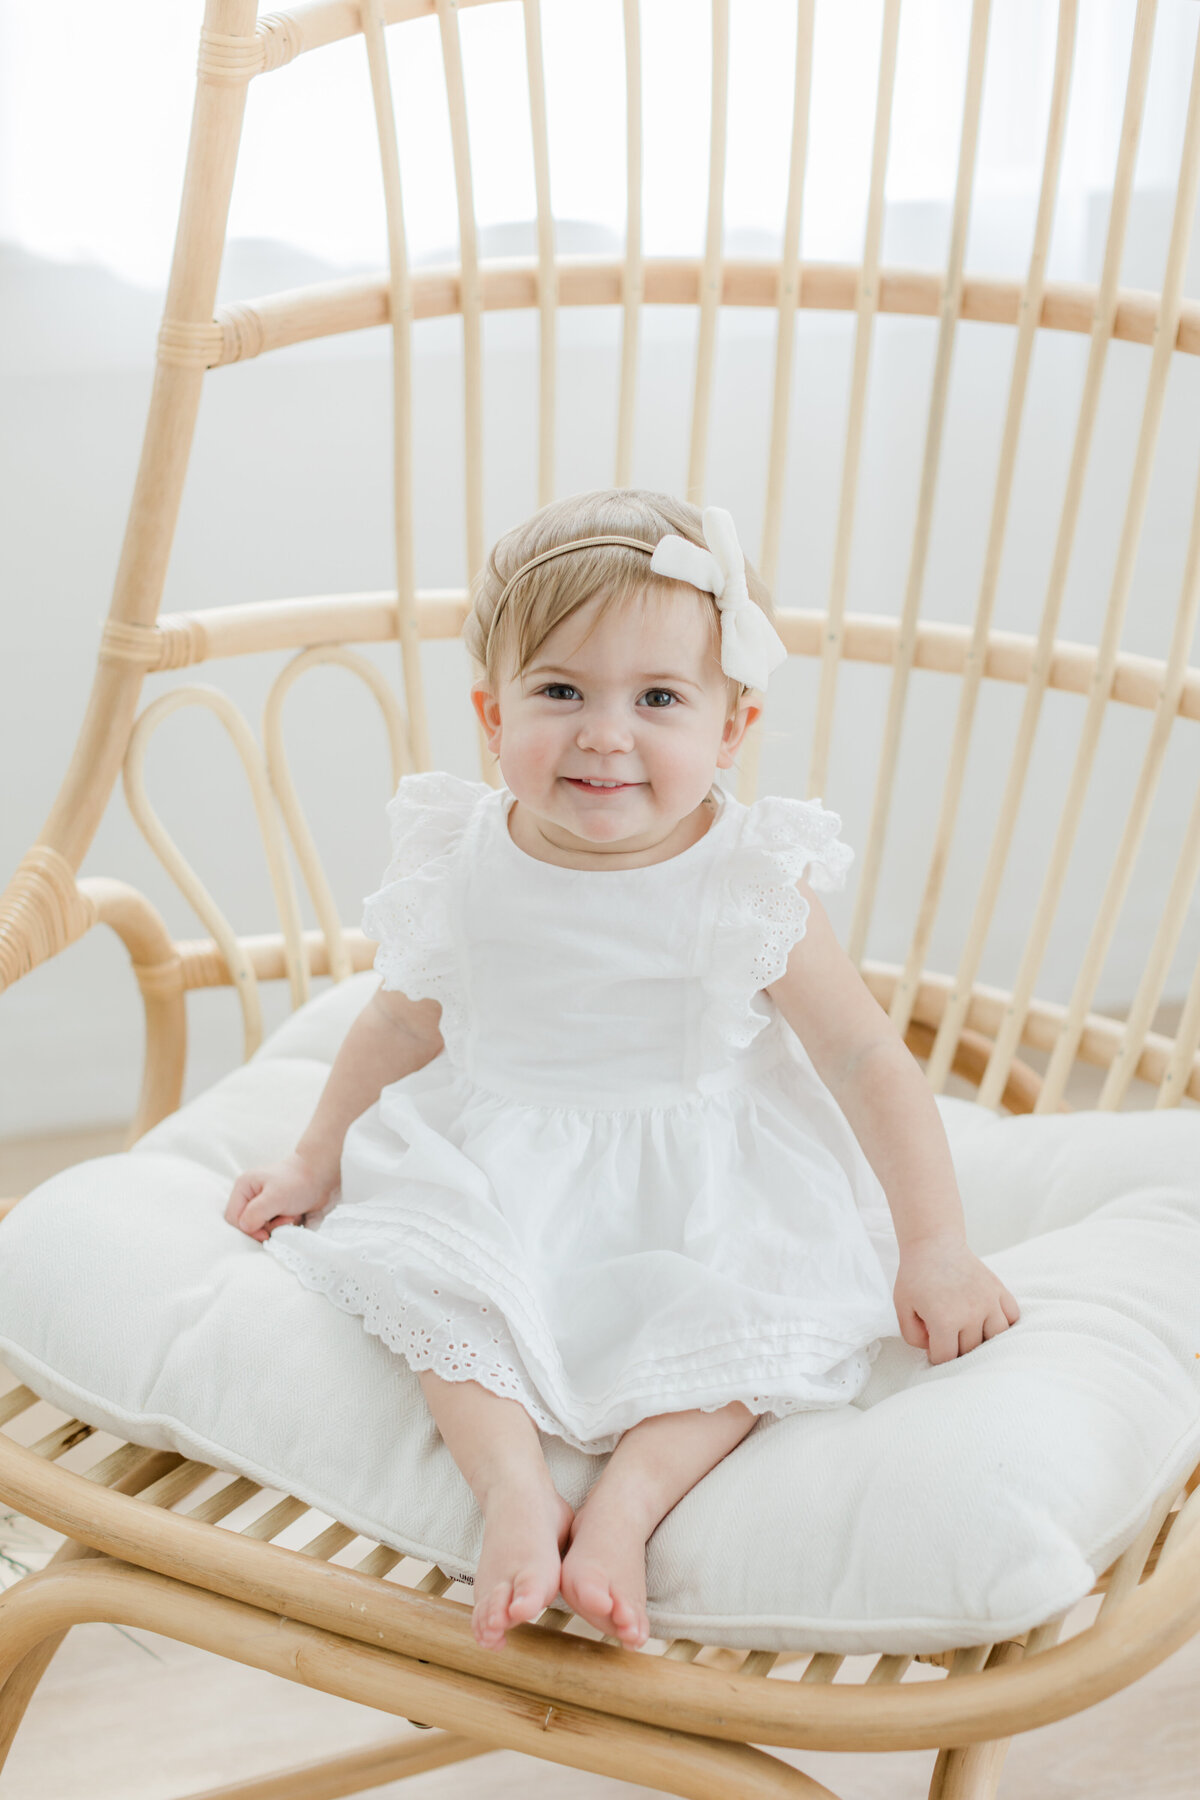 toddler girl wearing a white dress with a bow in her hair sitting on a rattan chair photographed by Philadelphia Portrait Photographer Tara Federico